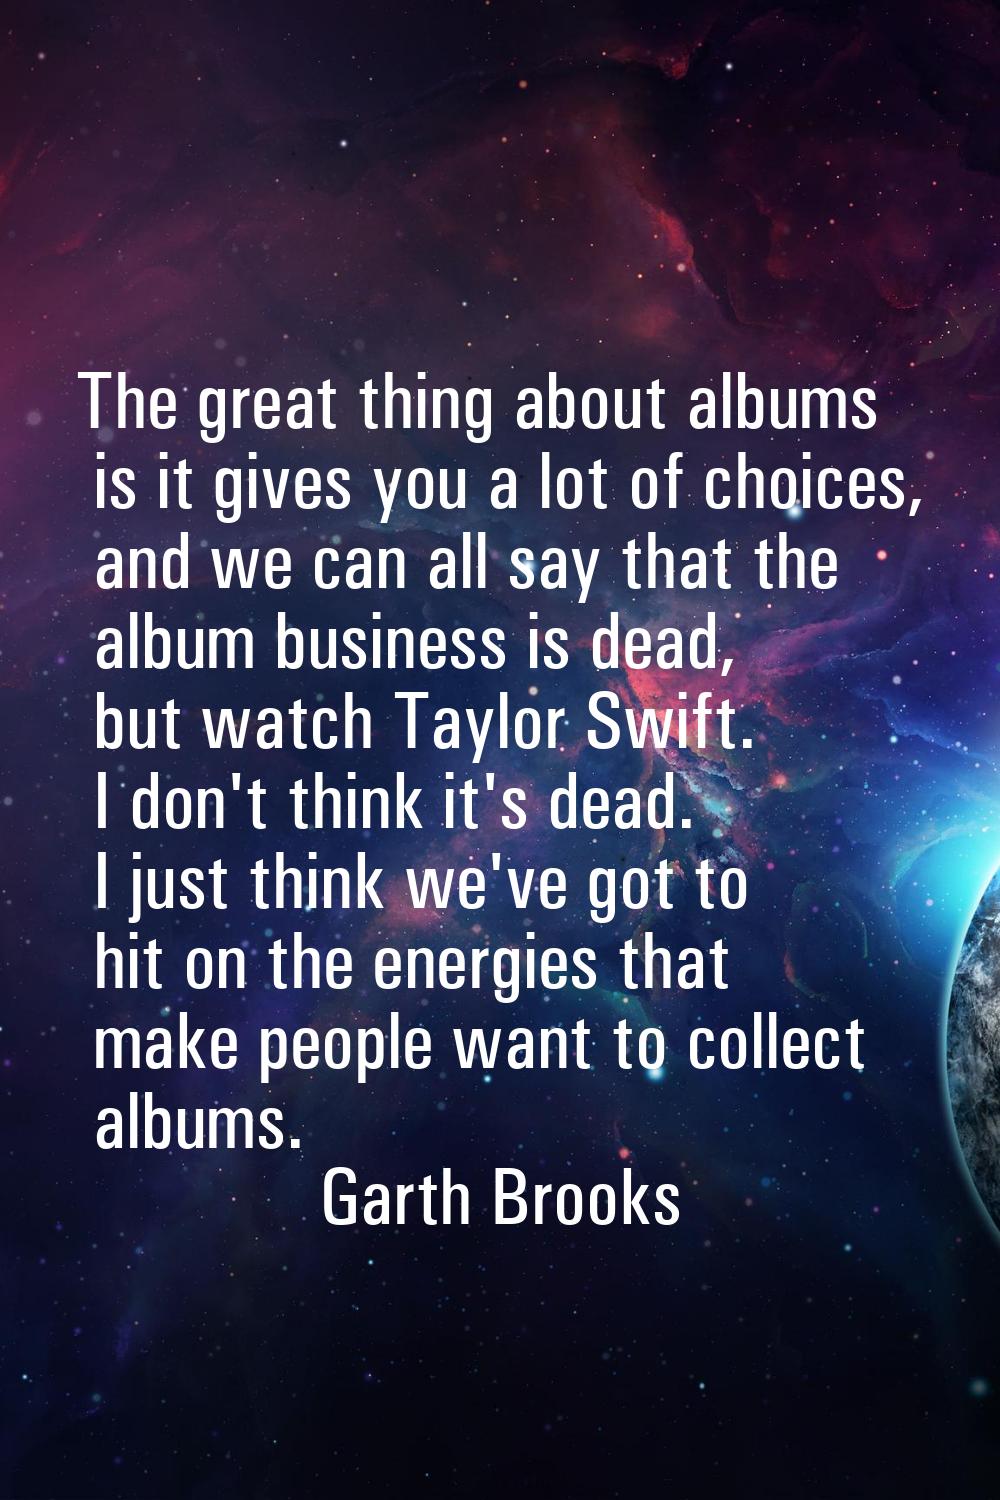 The great thing about albums is it gives you a lot of choices, and we can all say that the album bu